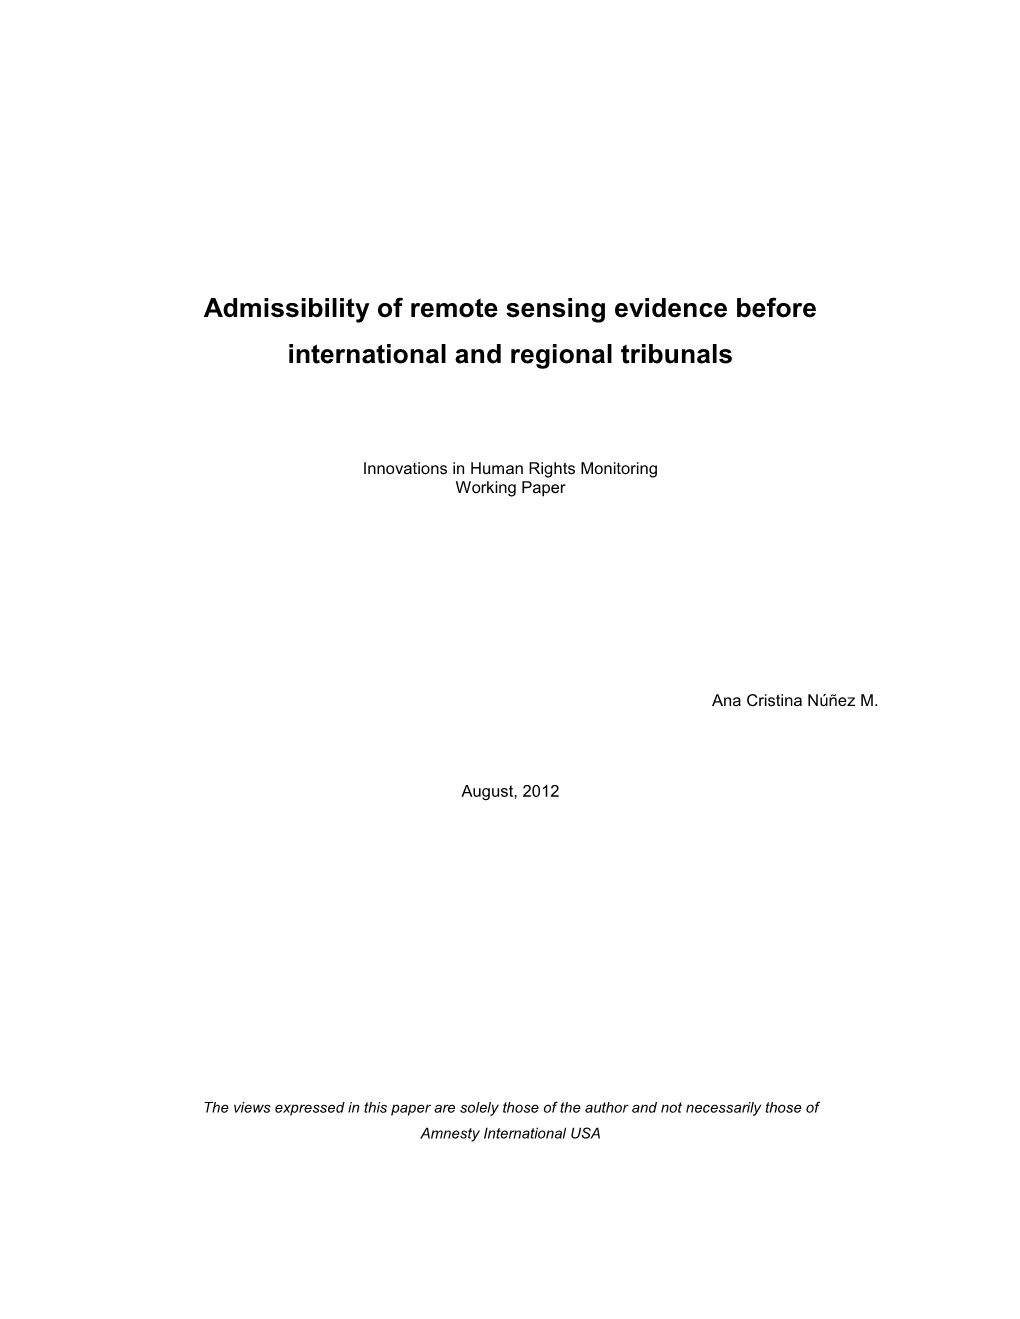 Admissibility of Remote Sensing Evidence Before International and Regional Tribunals